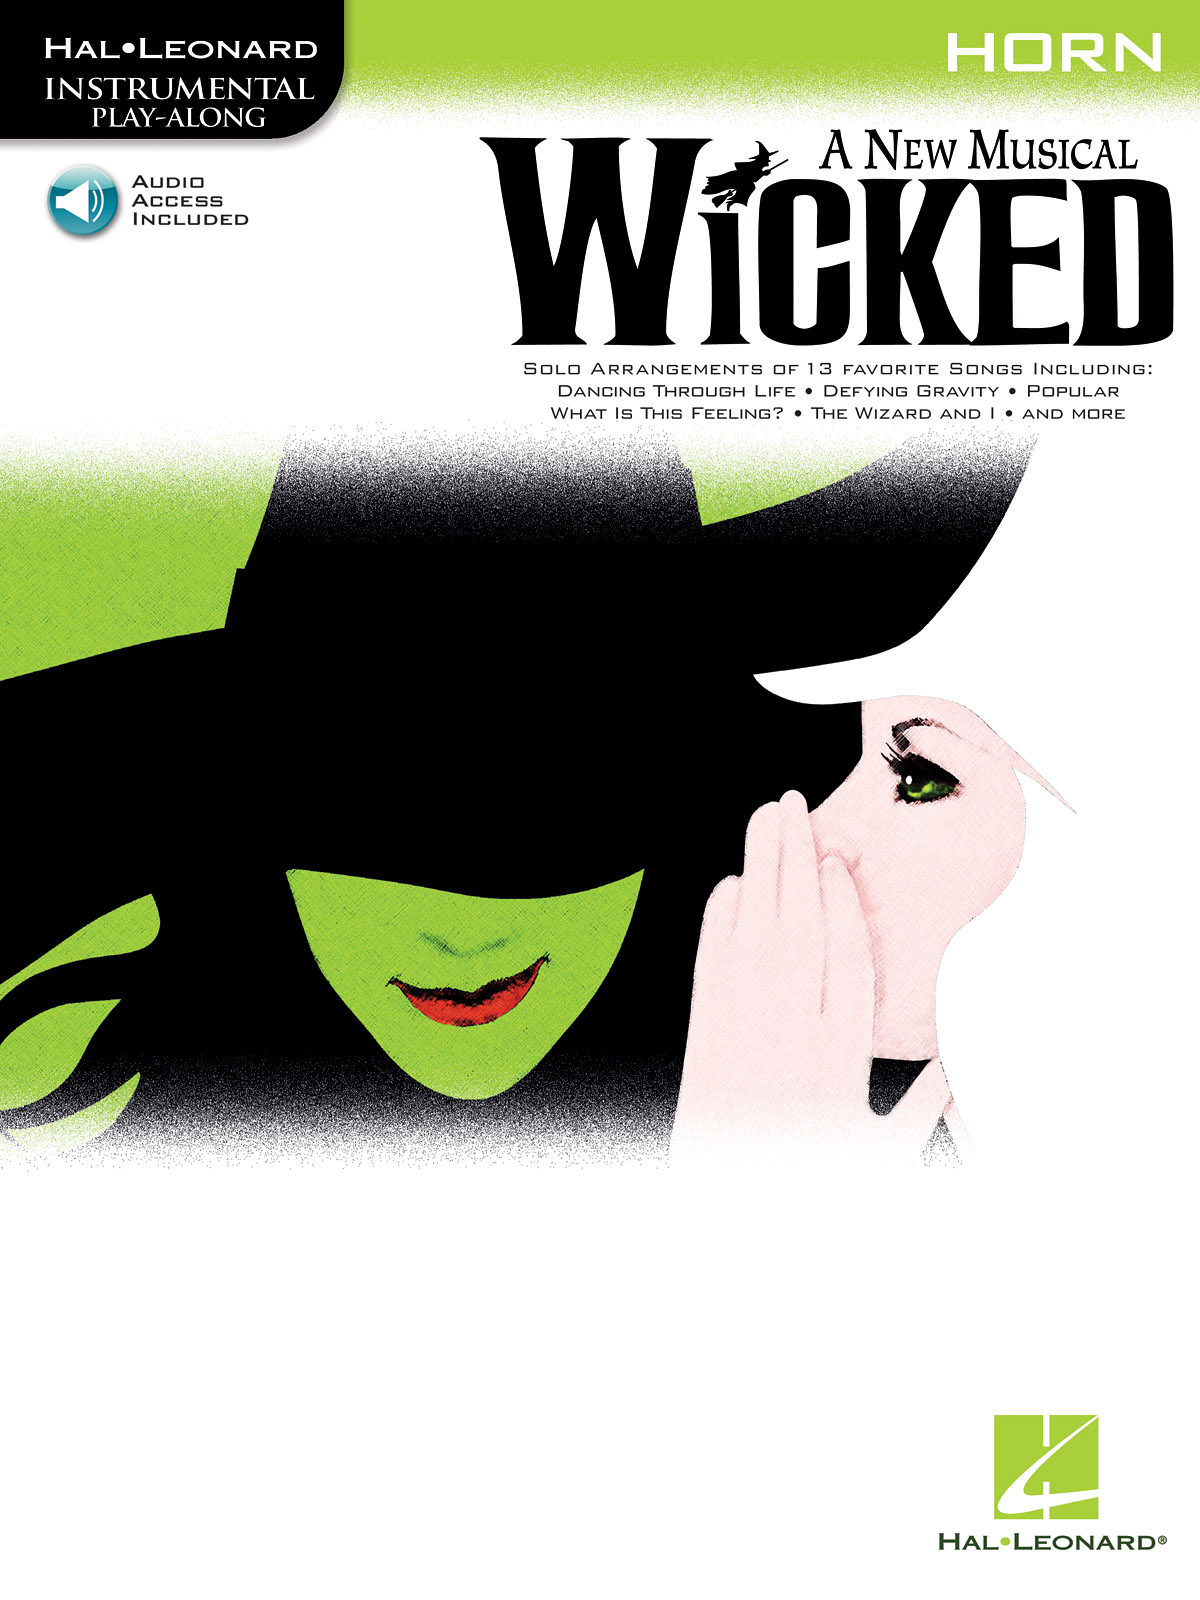 Wicked (New Musical) Horn